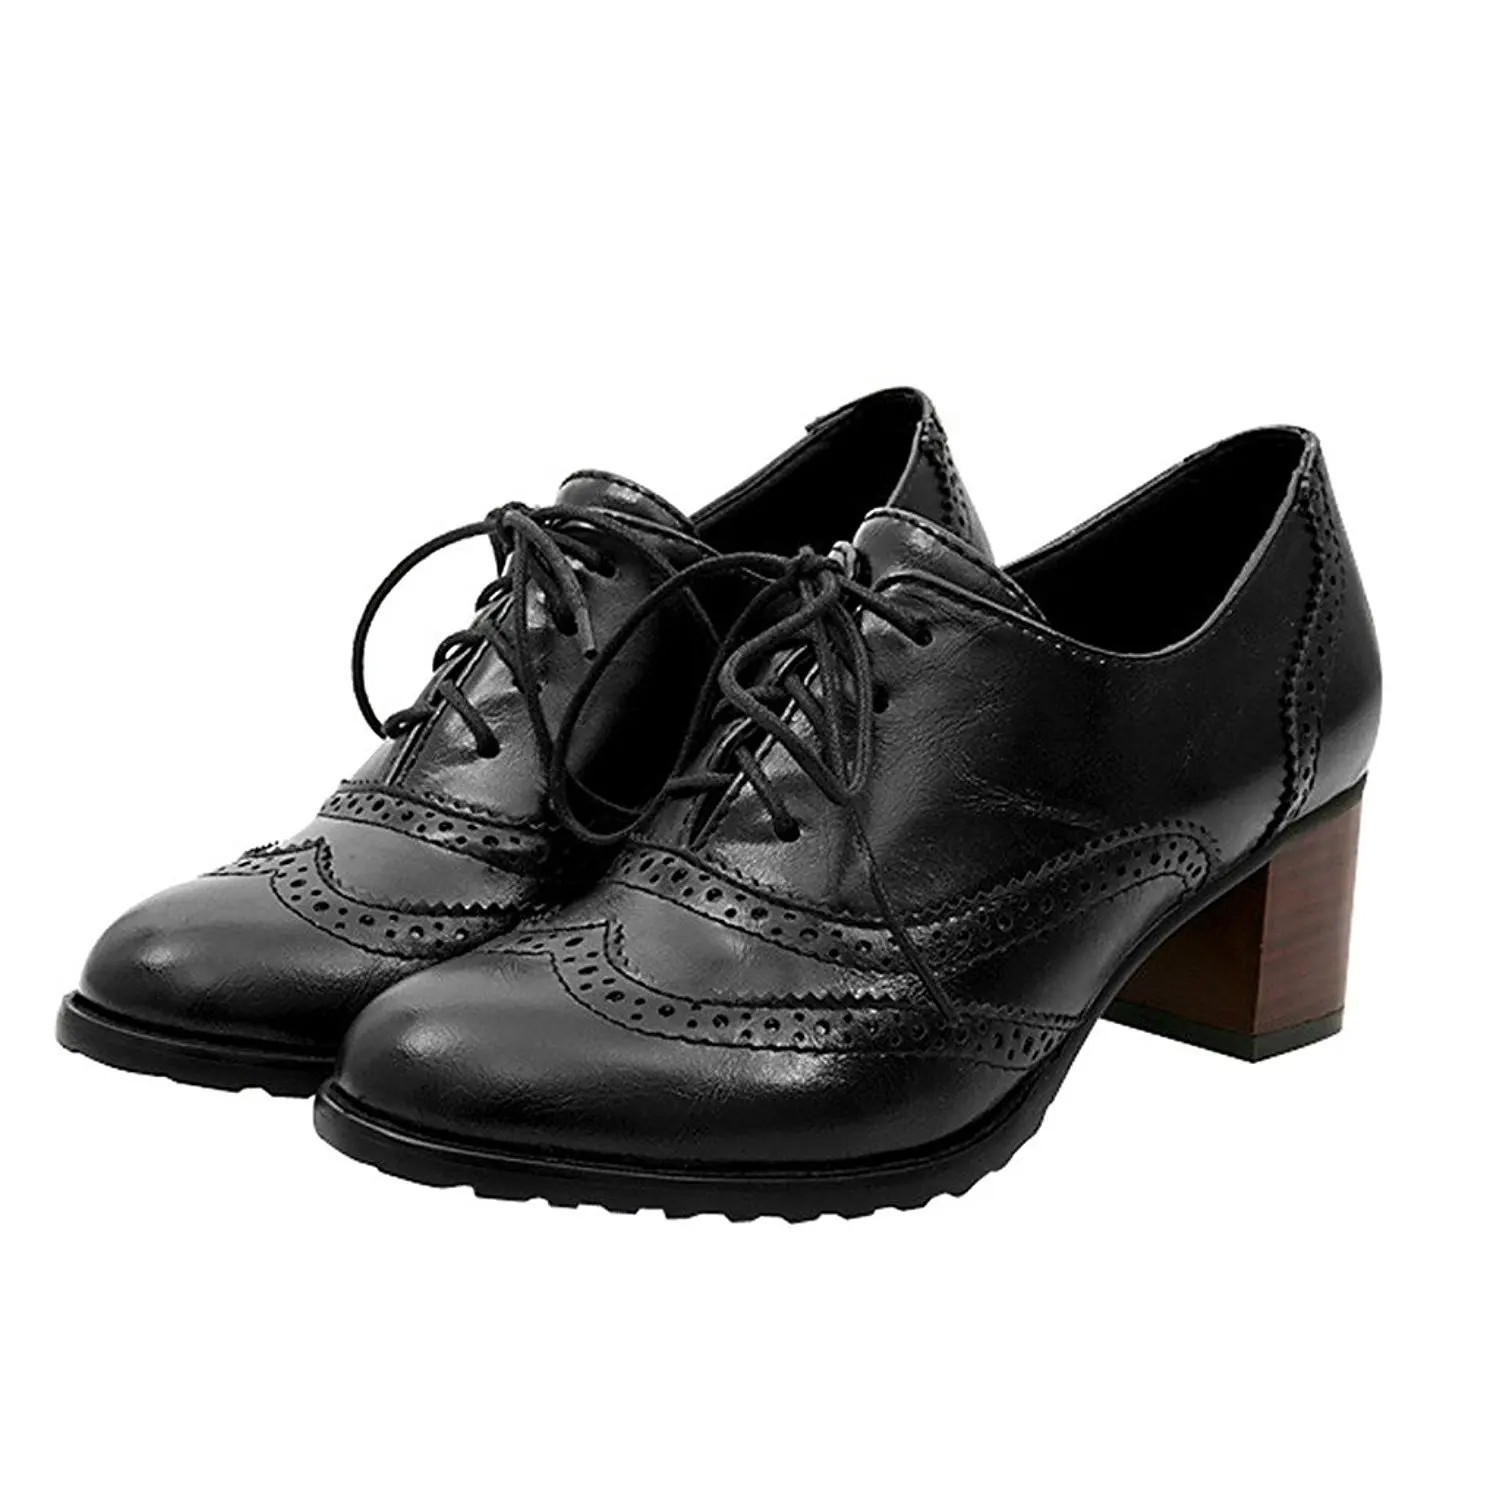 Cheap Brogue Shoes Womens, find Brogue Shoes Womens deals on line at ...